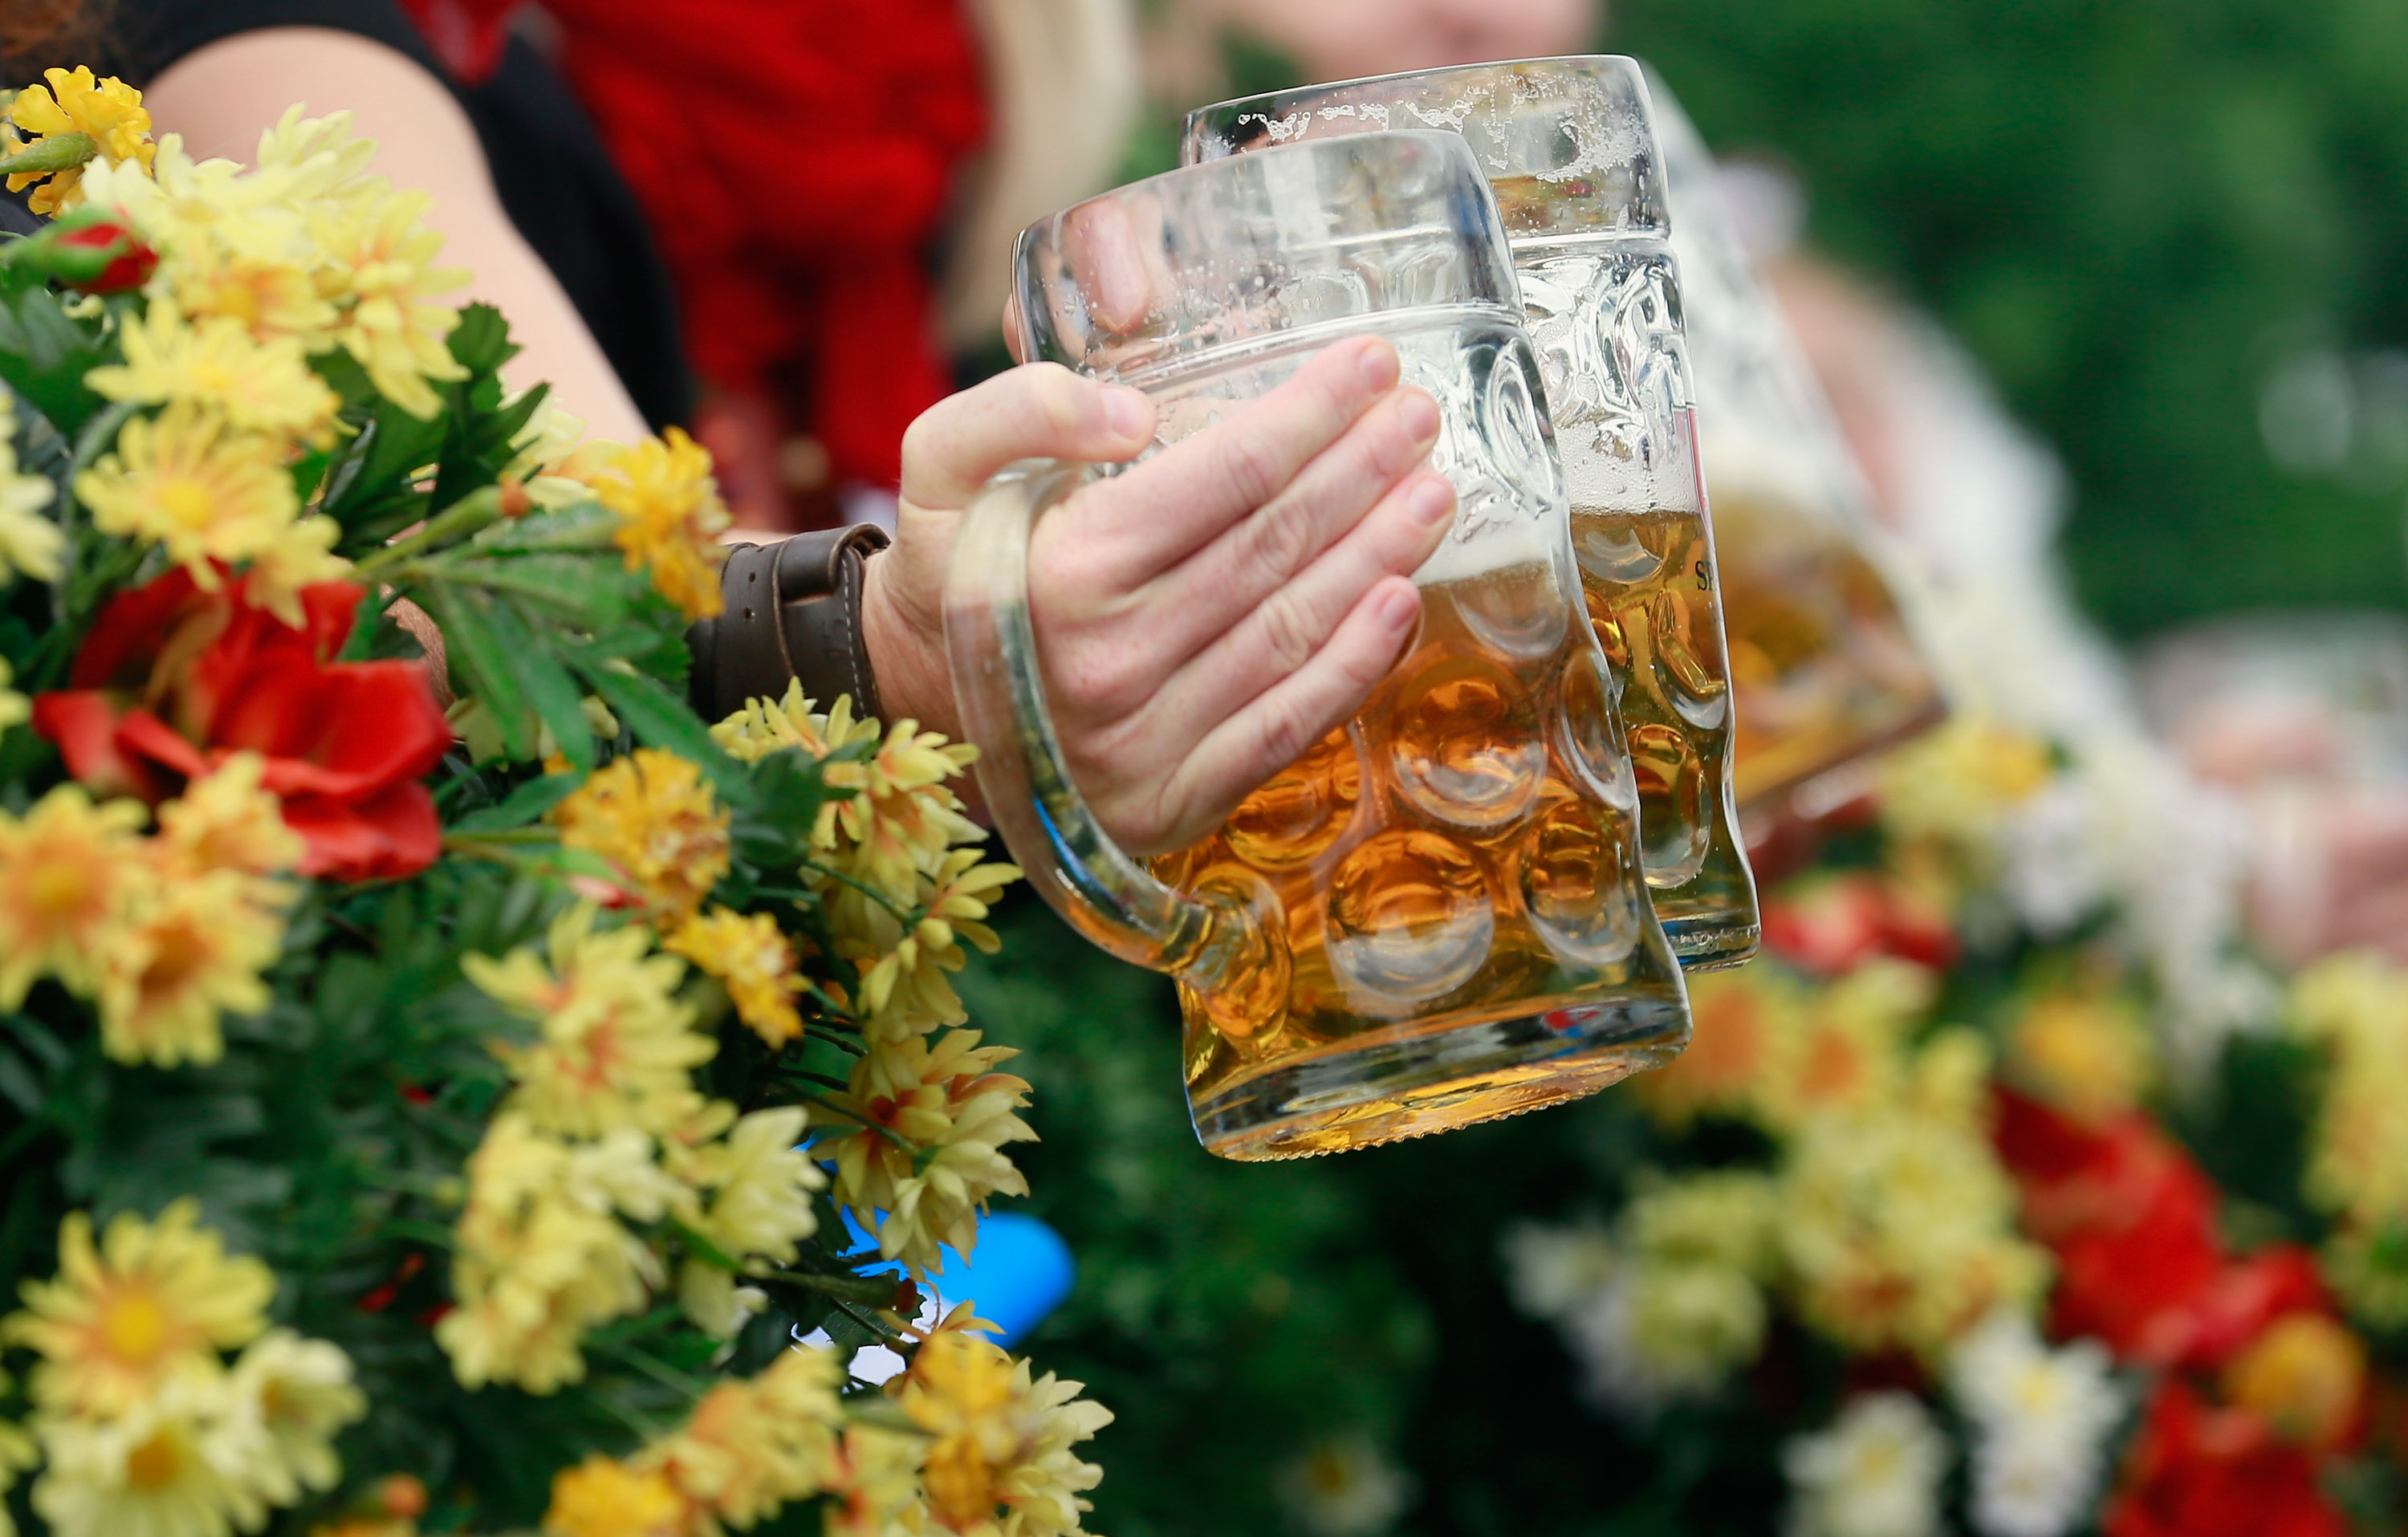 Love And Hop Piness Abounds At Oktoberfest In Germany